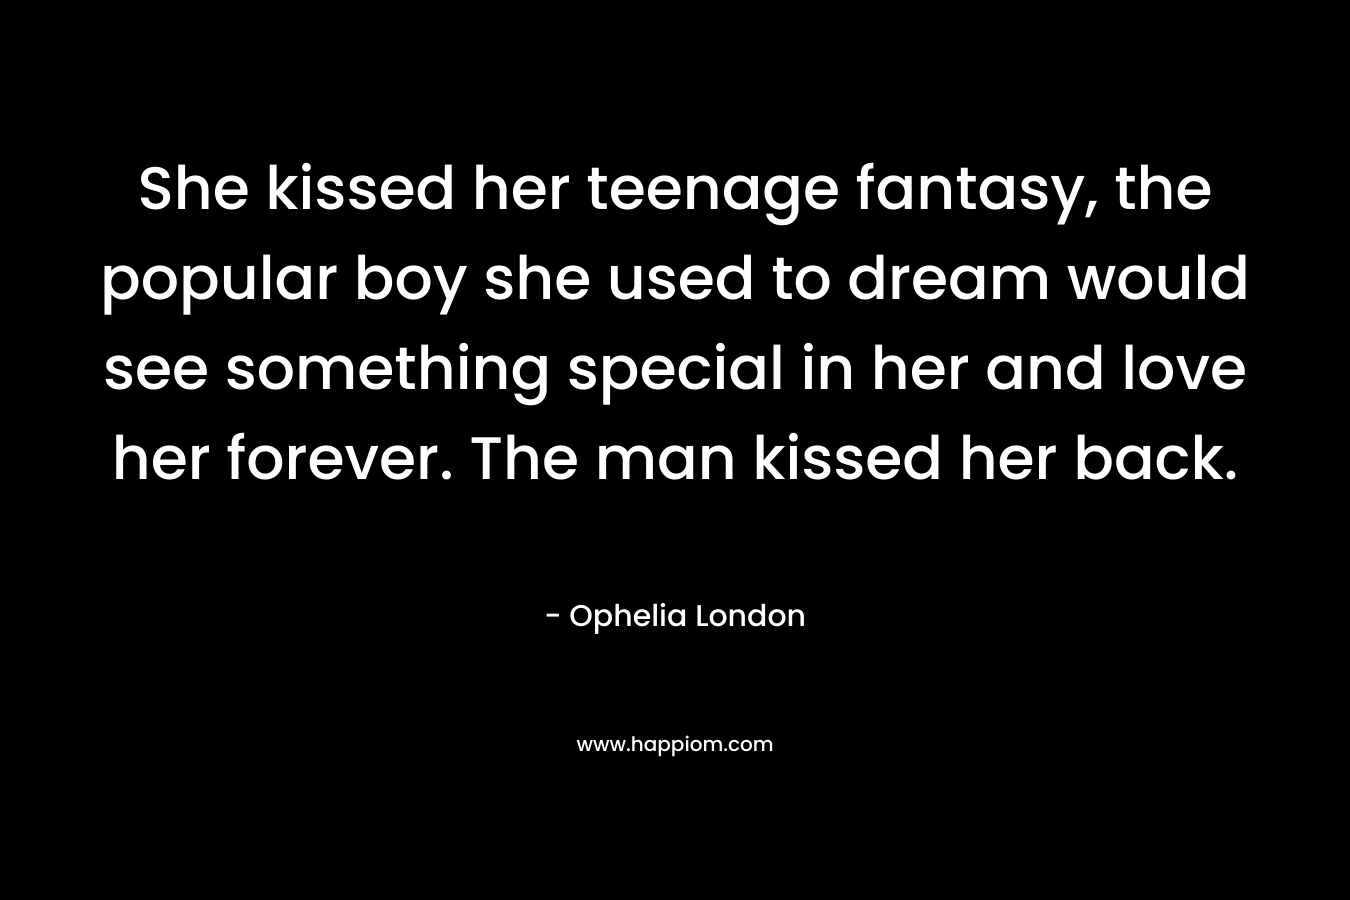 She kissed her teenage fantasy, the popular boy she used to dream would see something special in her and love her forever. The man kissed her back. – Ophelia London